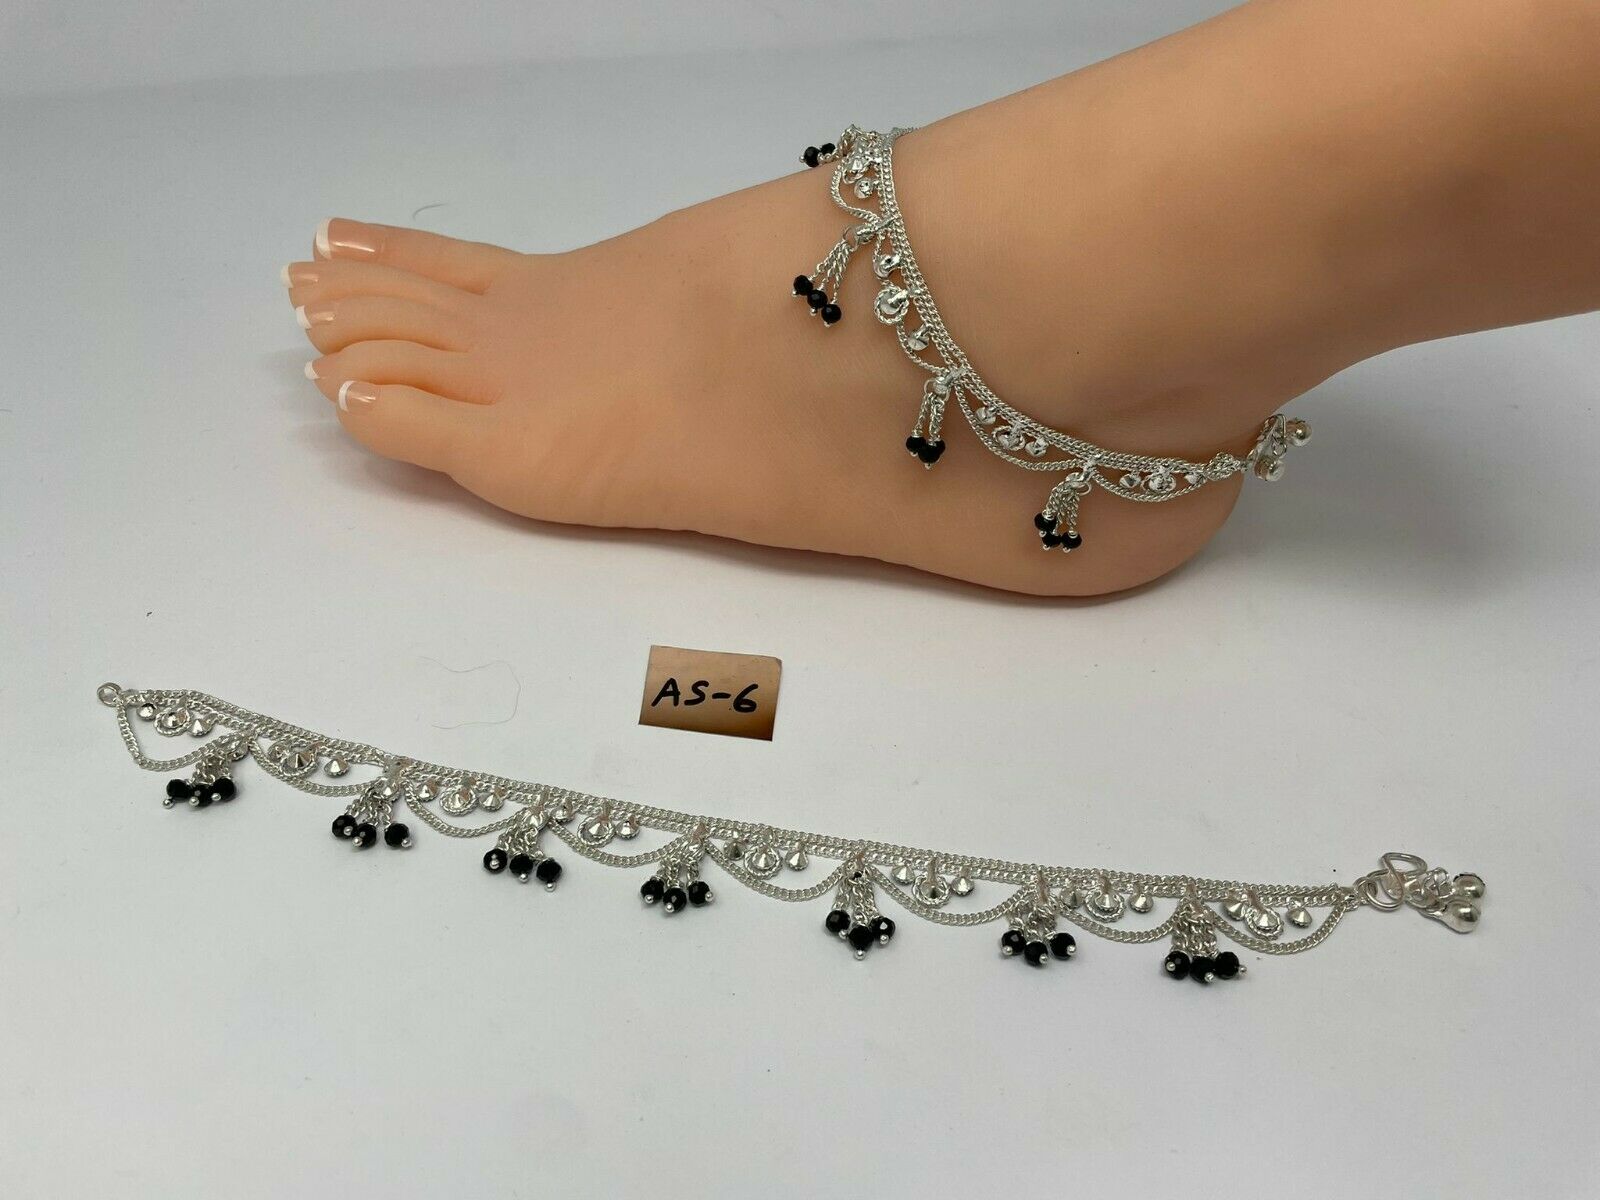 AS-6 Anklets Payal Pair for Legs Indian Jewelry